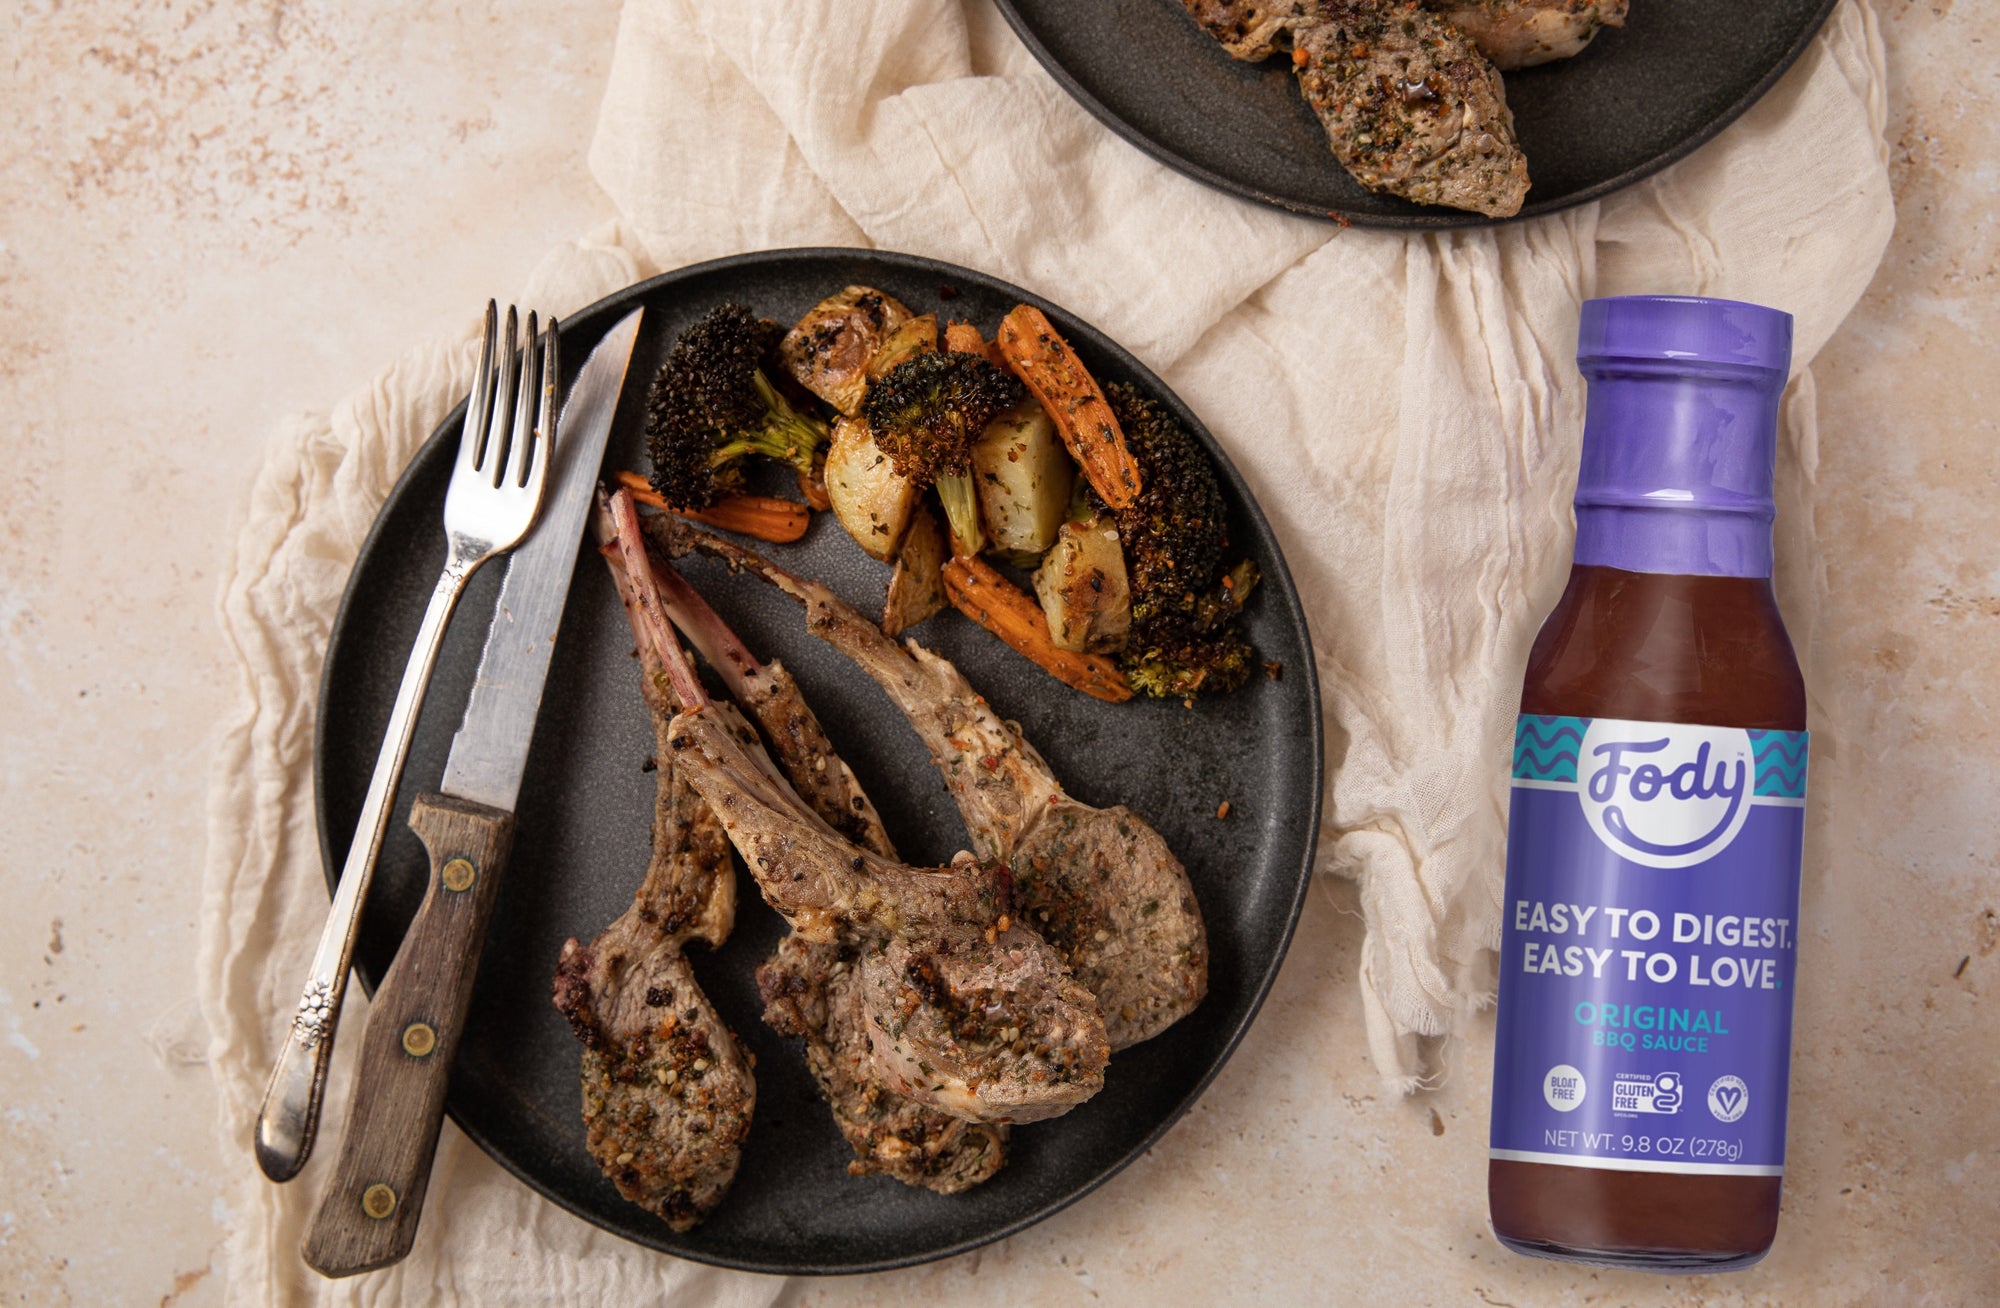 An image of Fody’s Herbed Lamb Chops with BBQ Sauce & Roasted Veggies on a plate beside a bottle of Fody's Maple BBQ sauce.